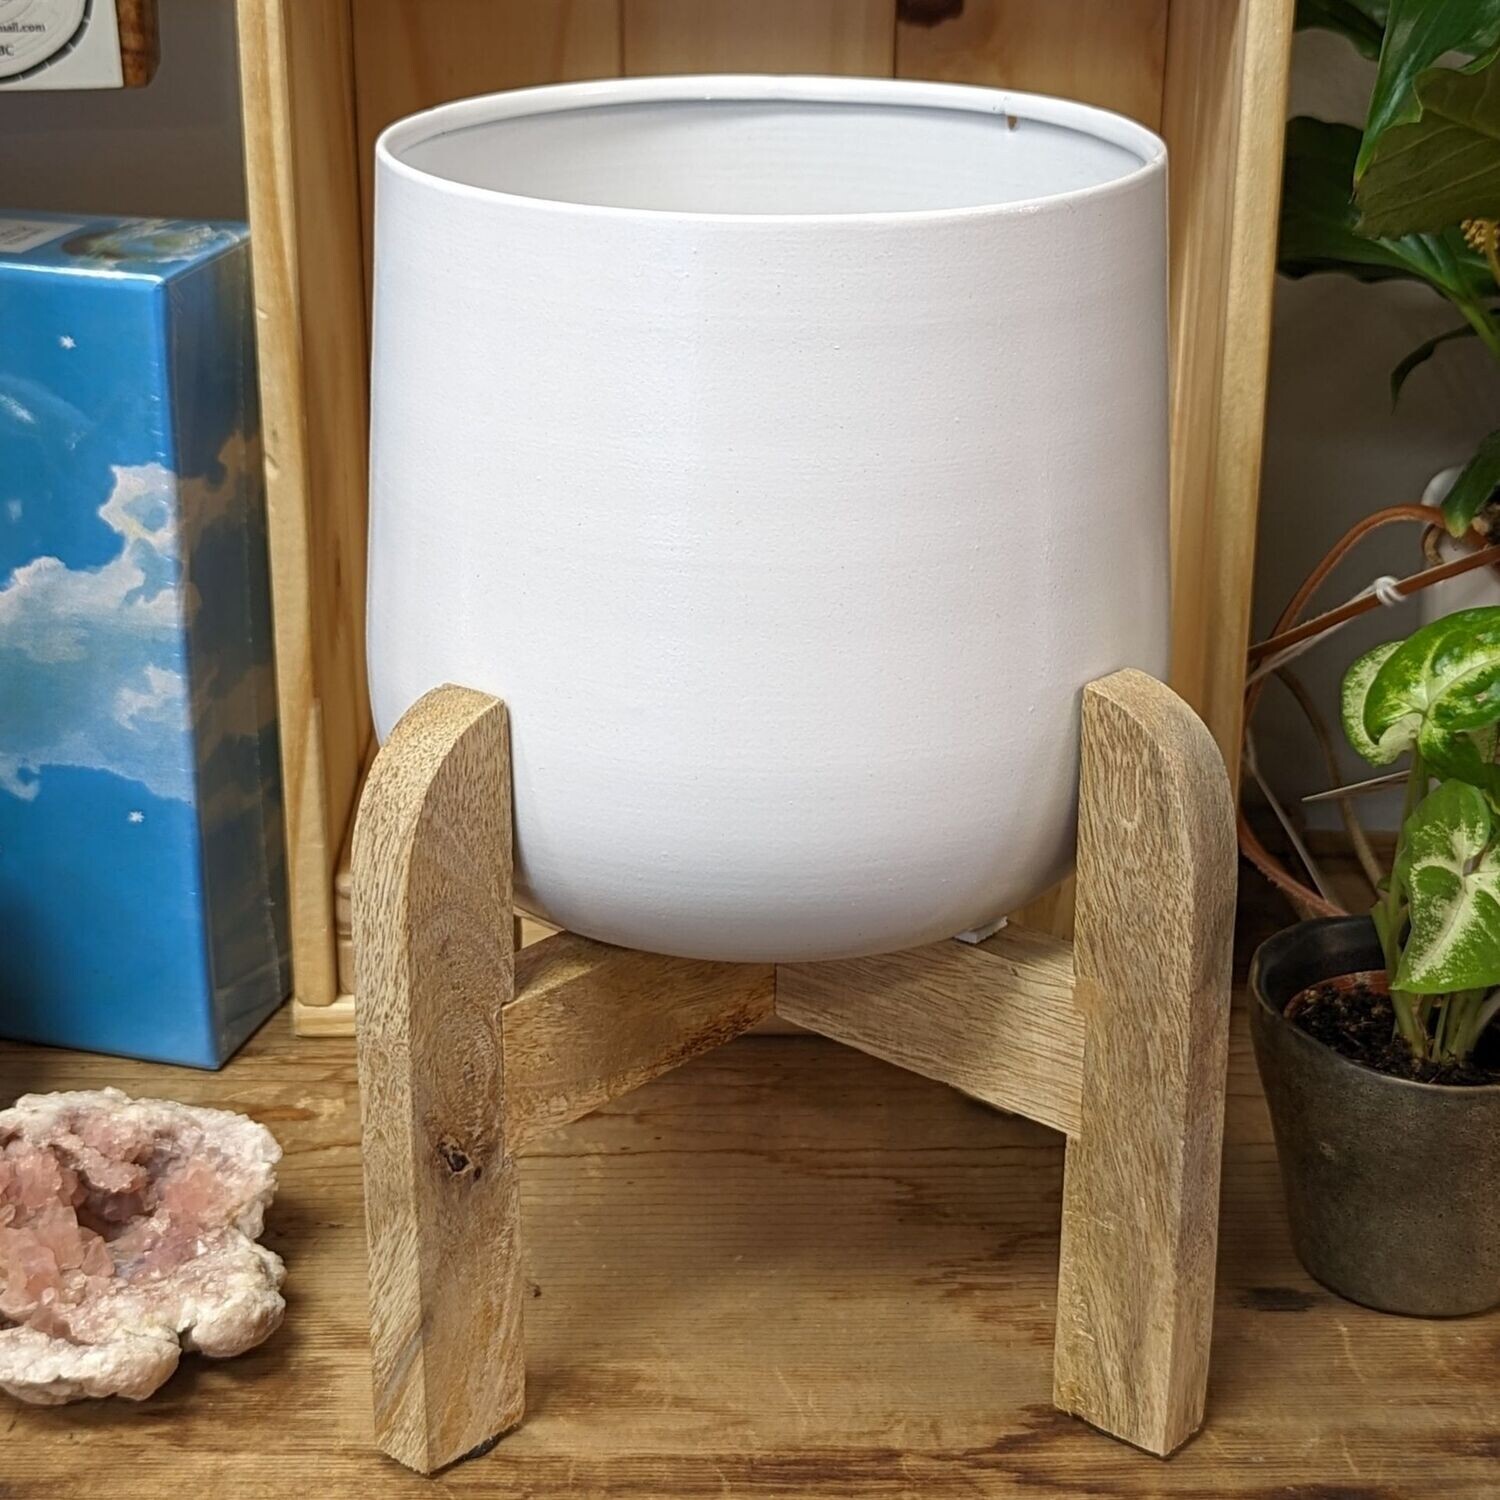 6" White Metal Pot With Wood Stand